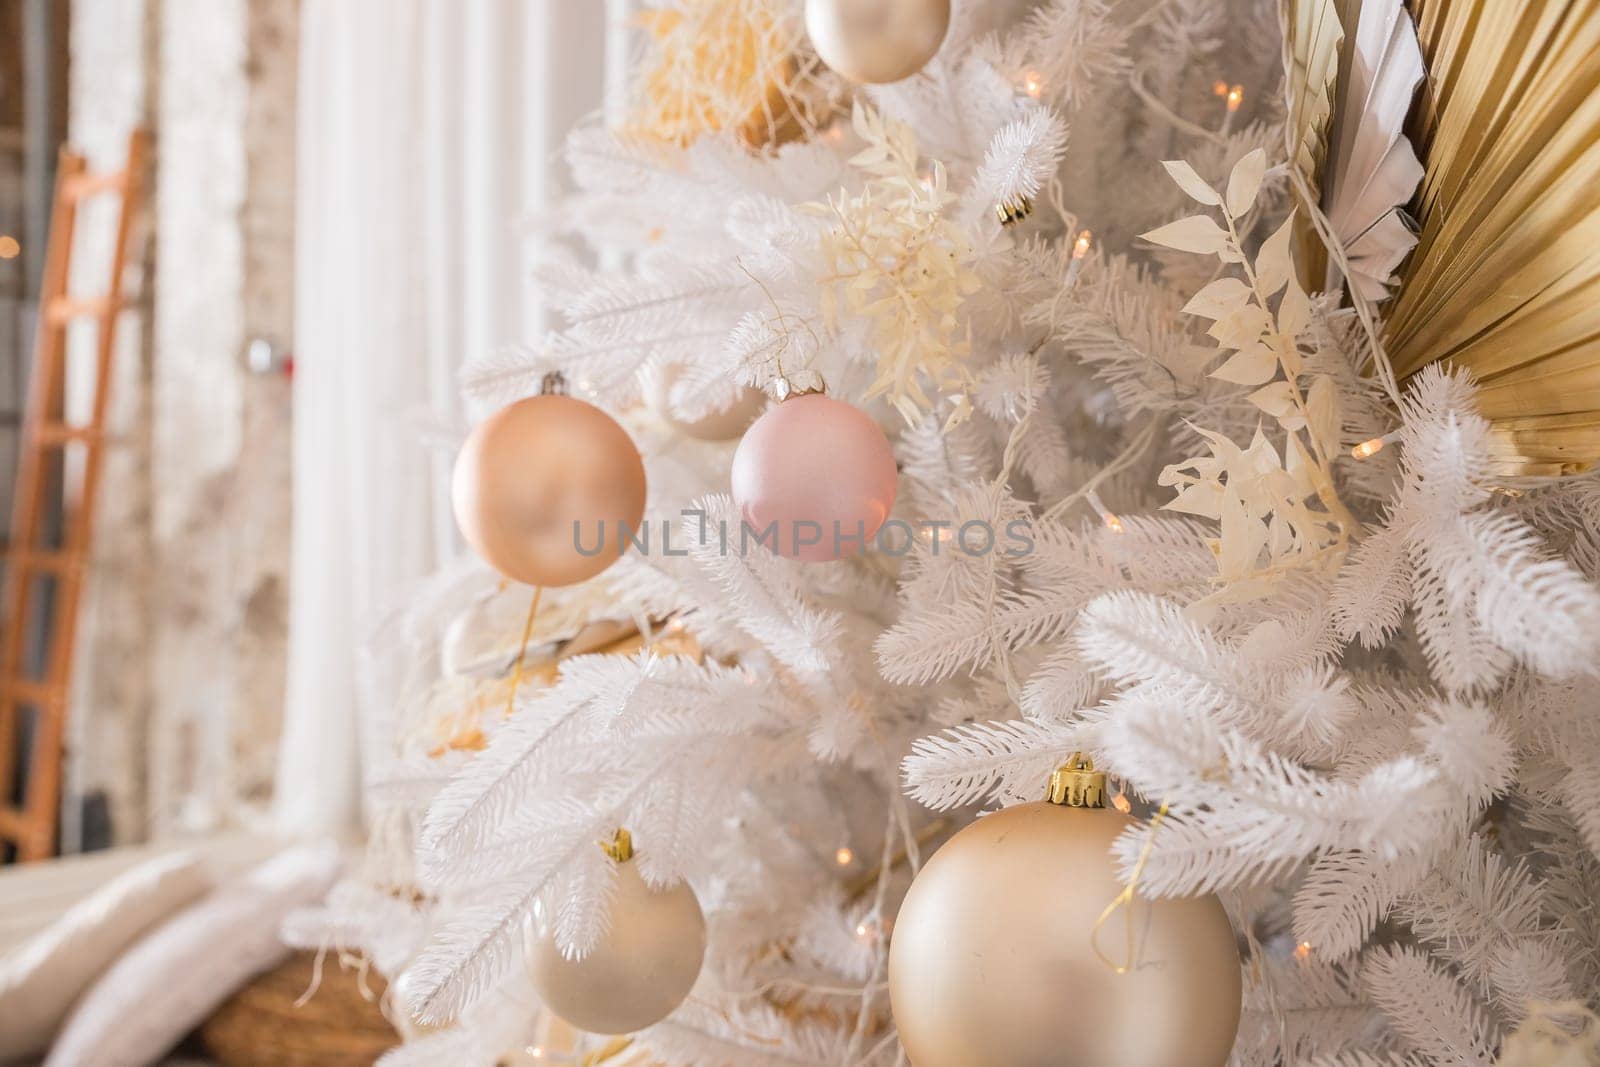 White Christmas decoration with balls on fir branches with blurred background